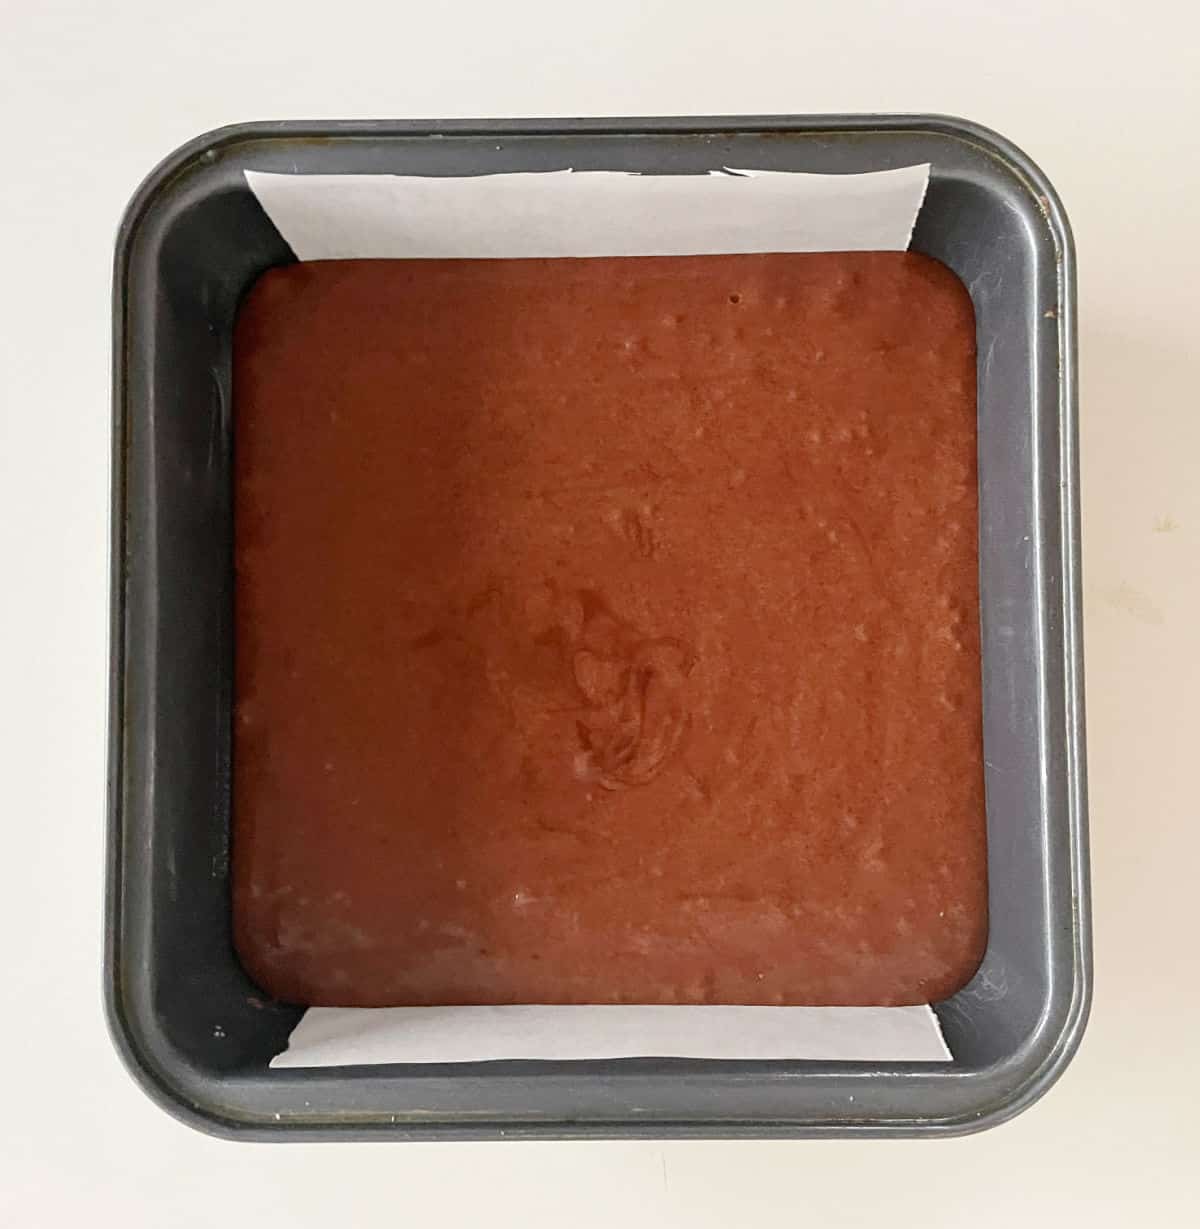 Square pan with brownie batter on a whitish surface. 